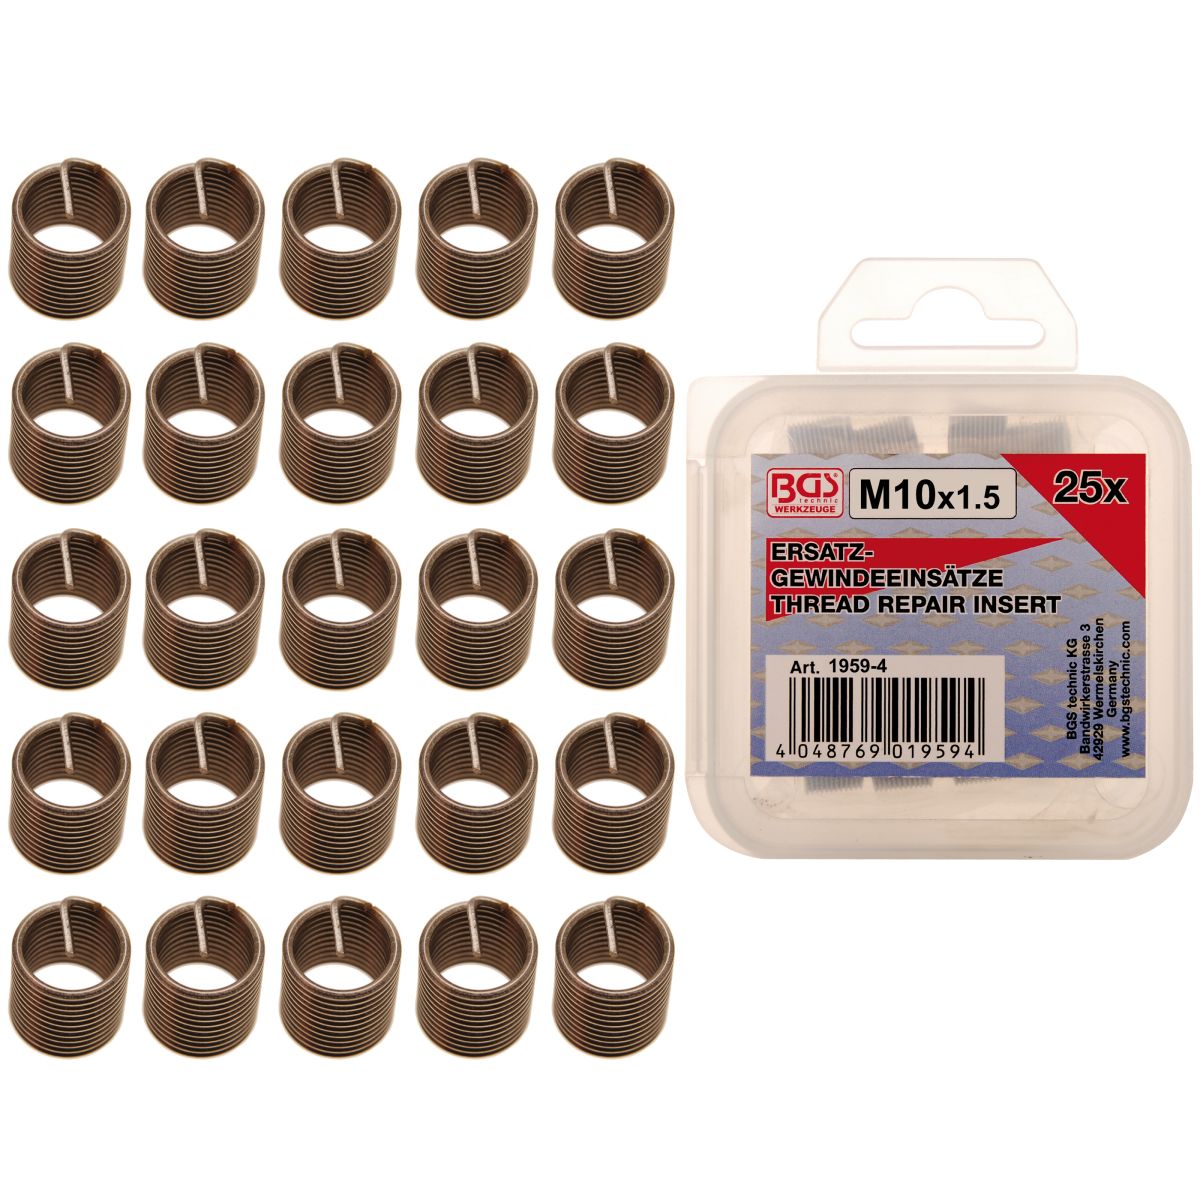 Replacement Thread Inserts | M10 x 1.5 mm | 25 pcs.